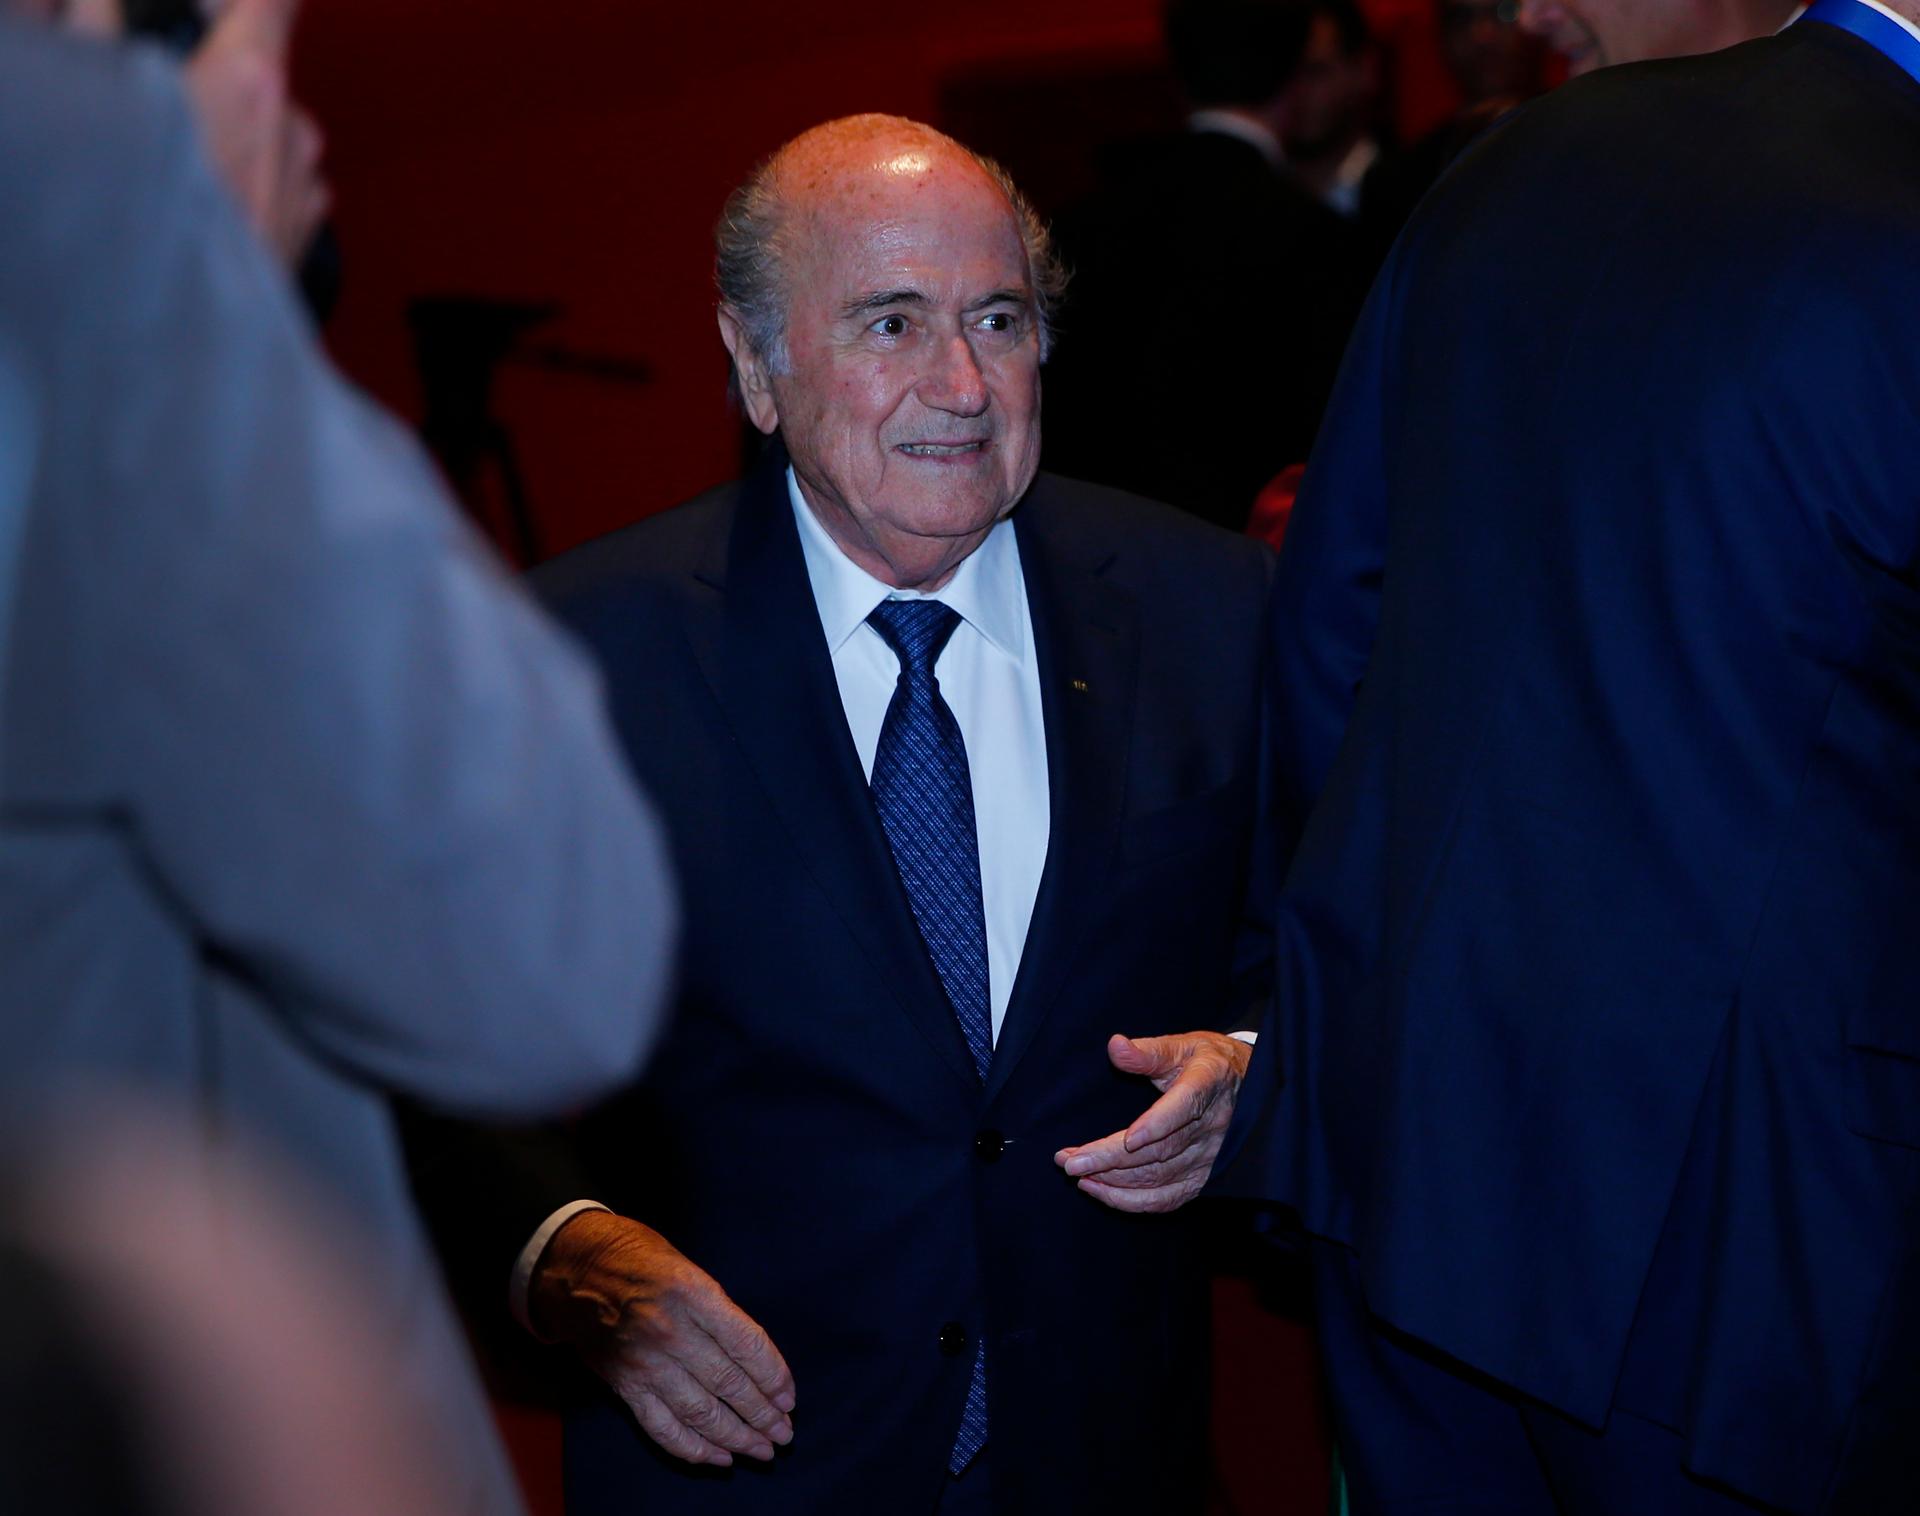 Longtime FIFA President Sepp Blatter at the annual FIFA meeting in Switzerland.